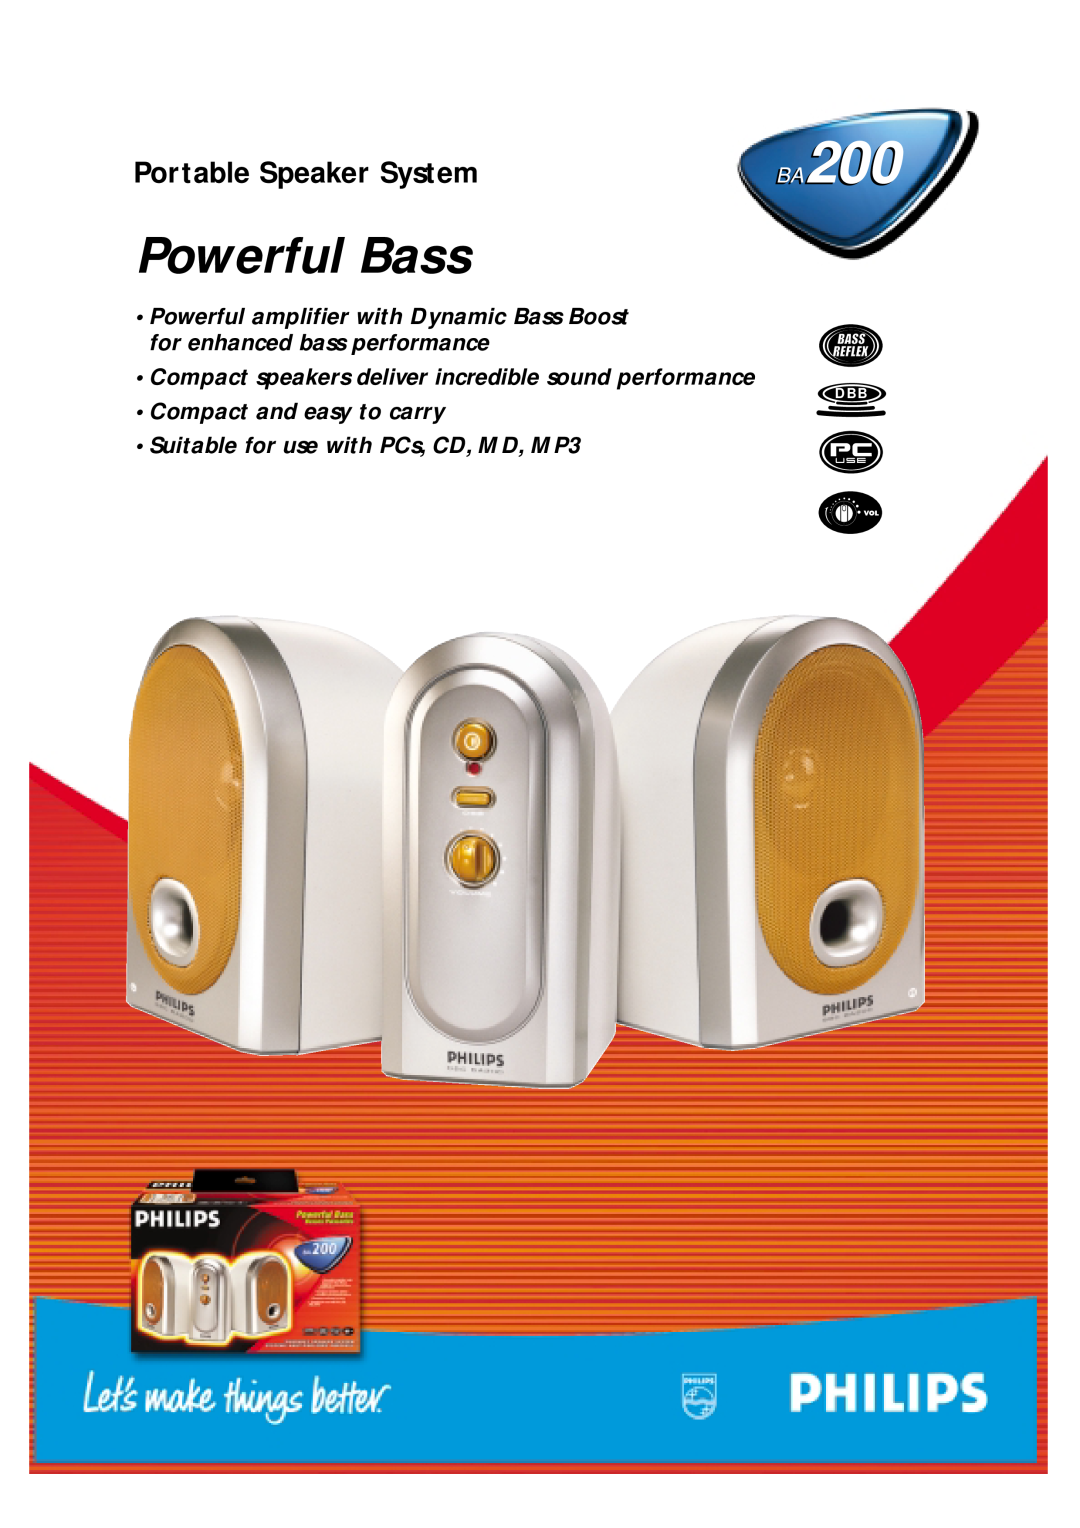 Philips BA200 manual Powerful Bass, Portable Speaker System, Compact and easy to carry 